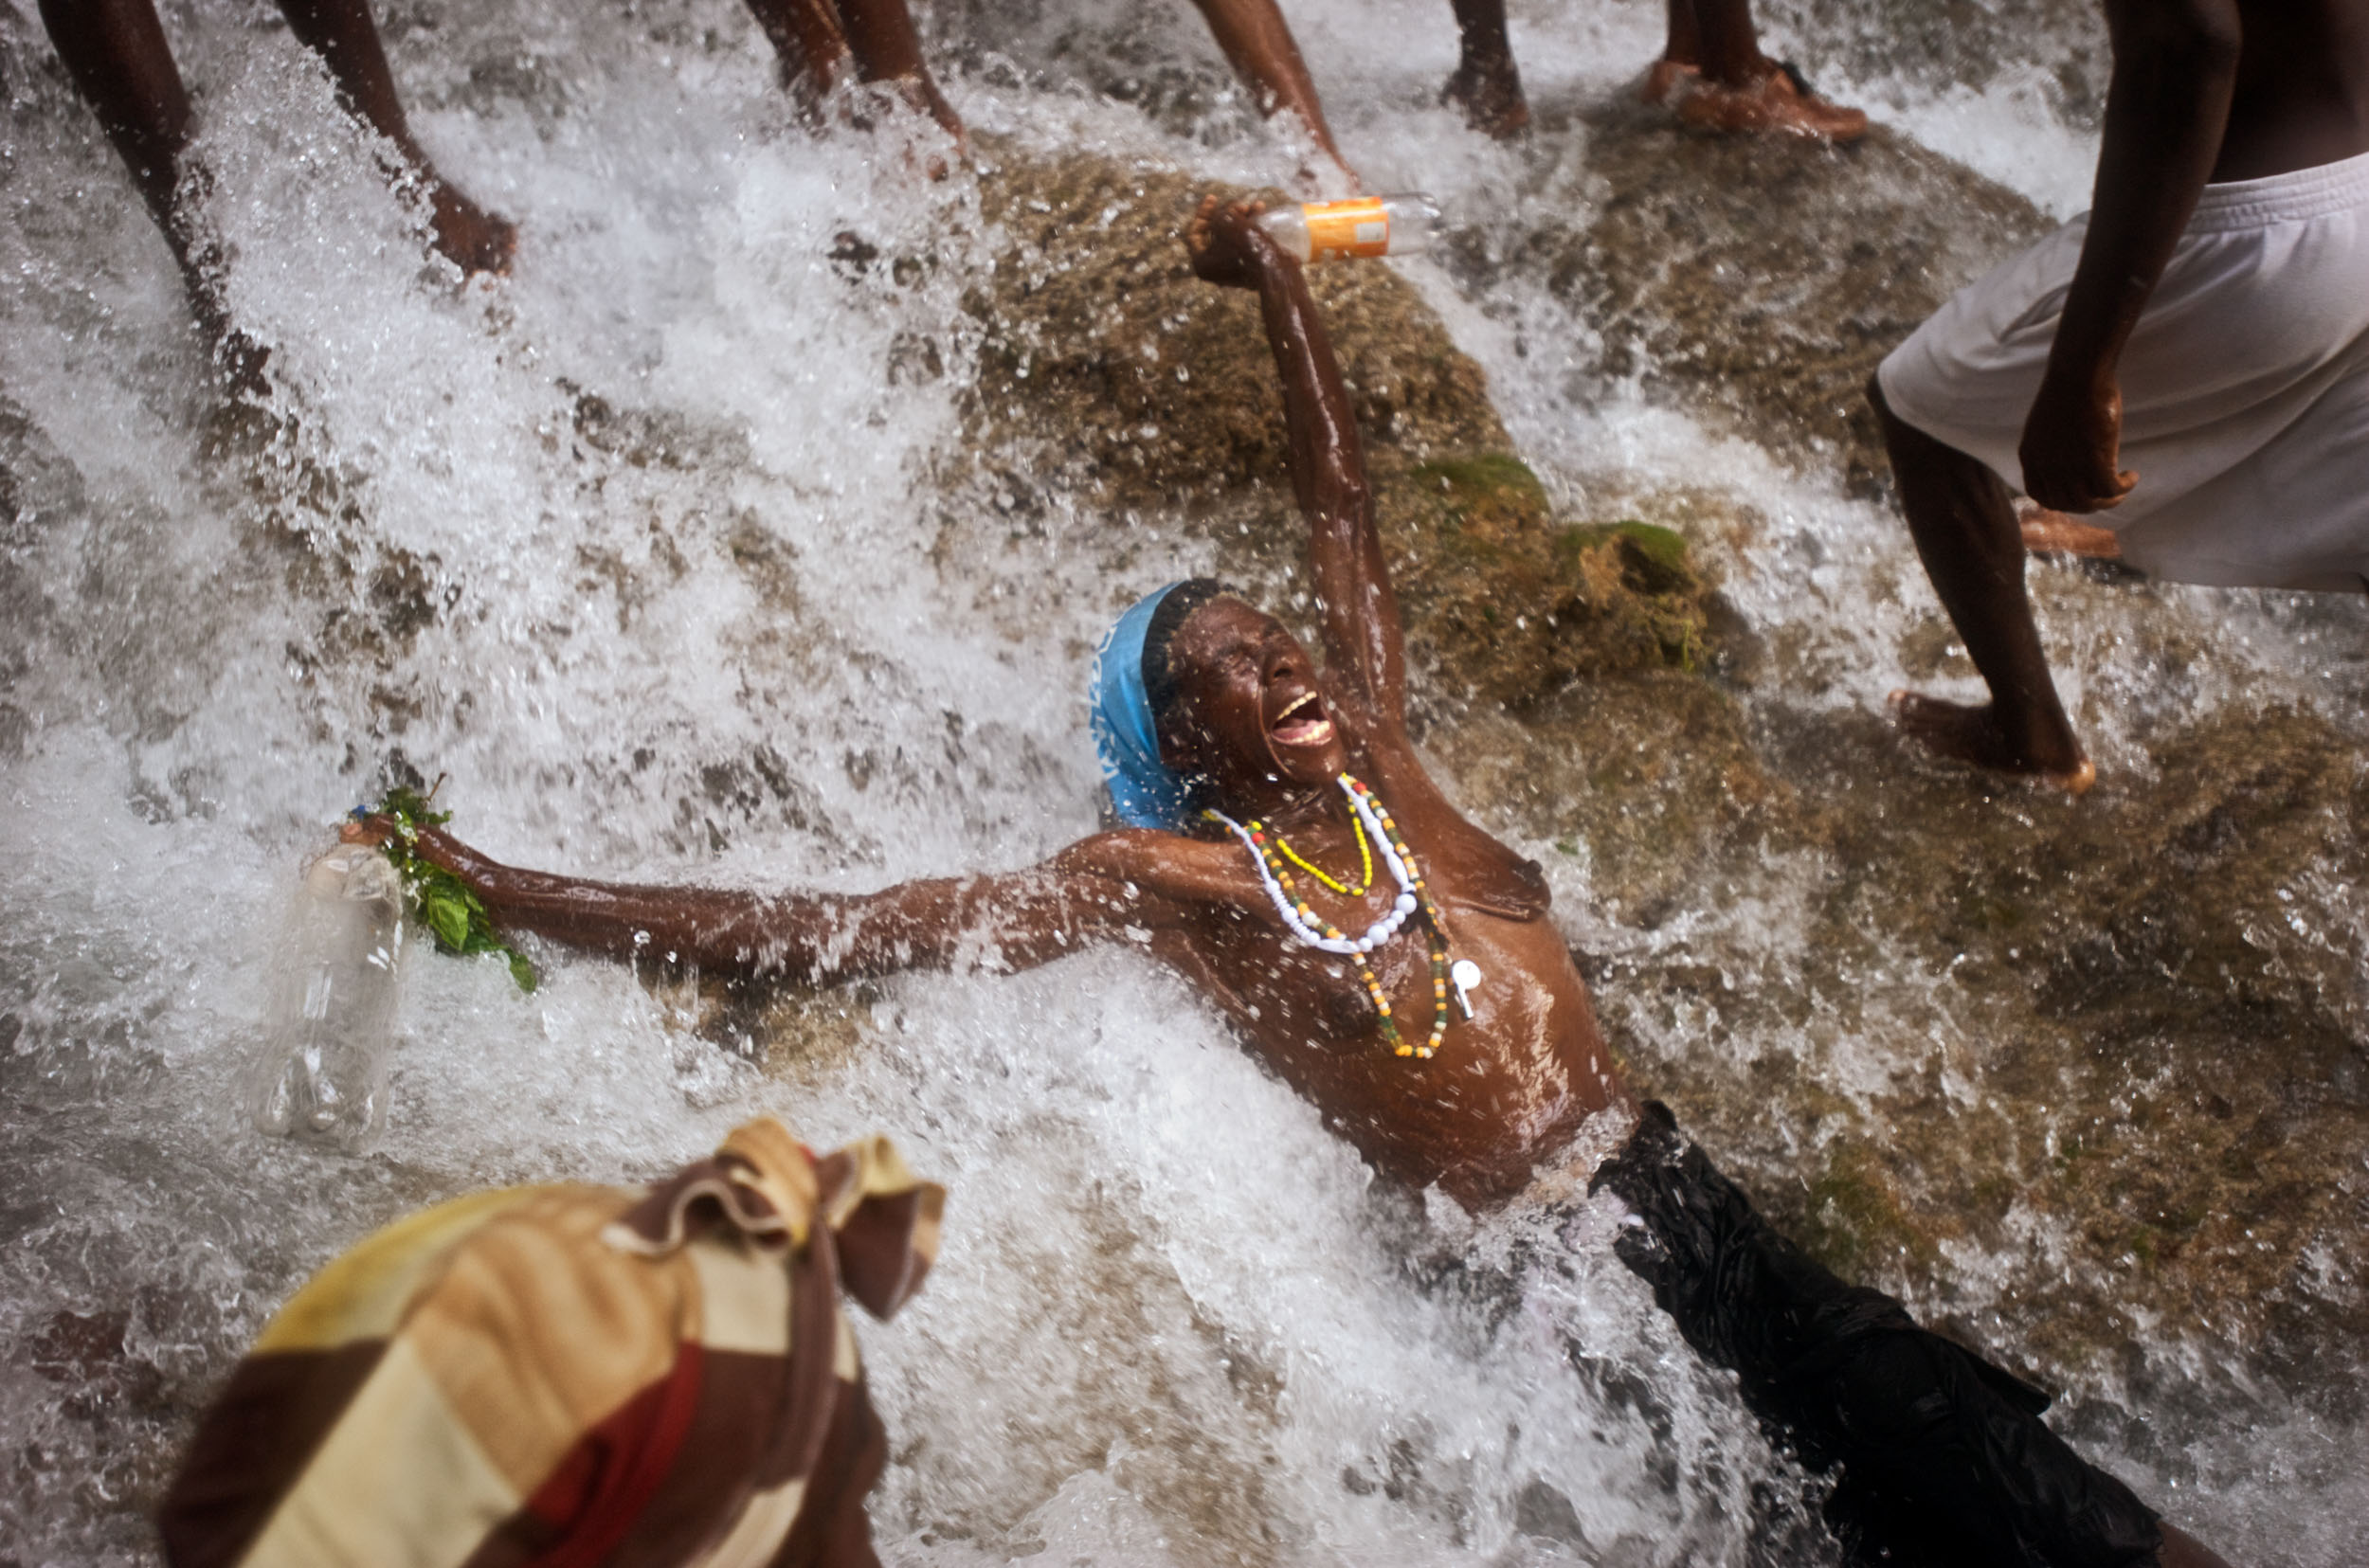 A woman worships in a waterfall during the Saut D